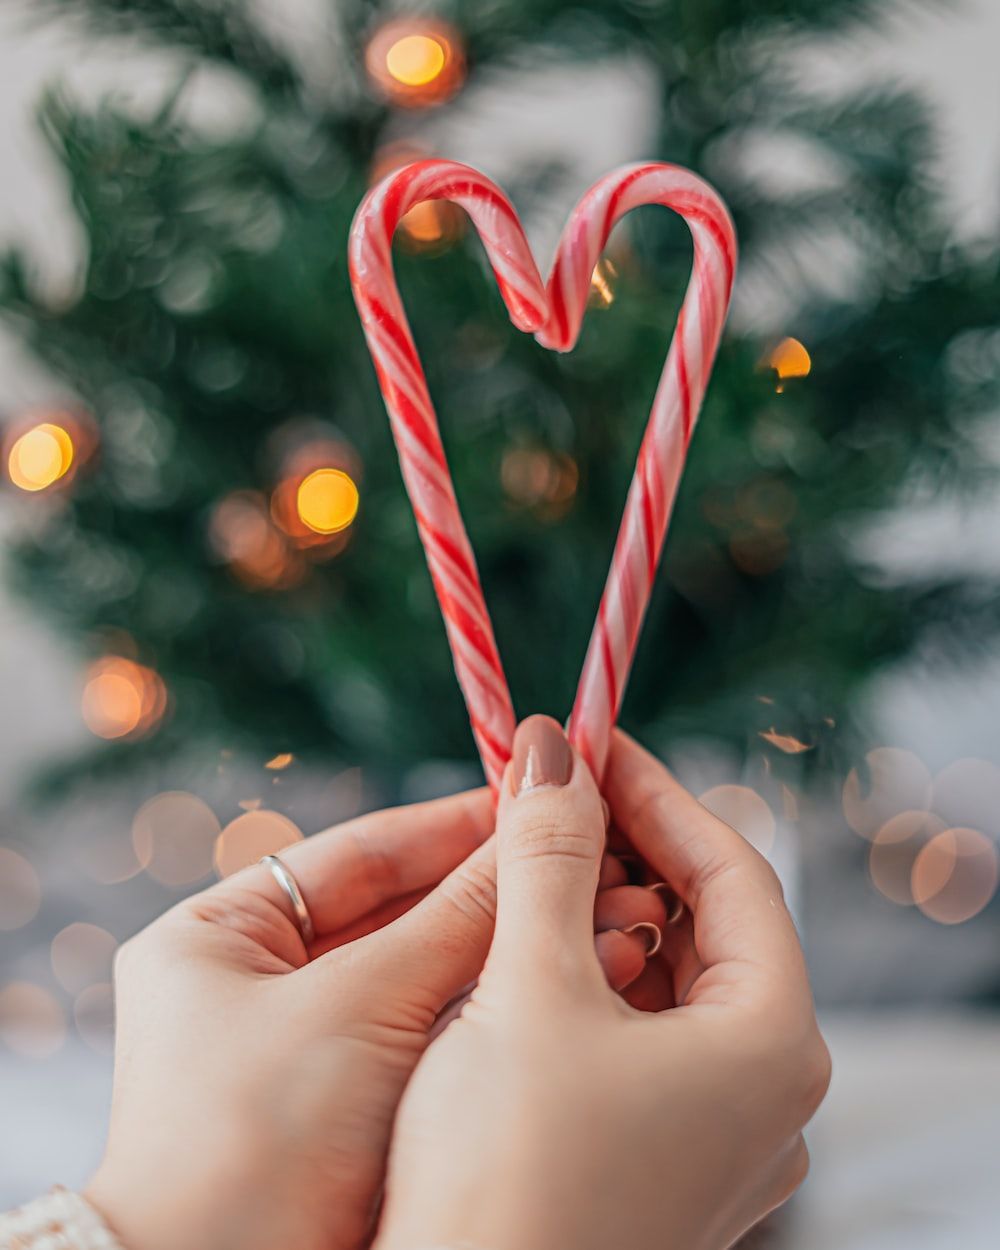 Hand Holding Two Candy Canes Picture, Photo, and Image for Facebook, Tumblr, , and Twitter